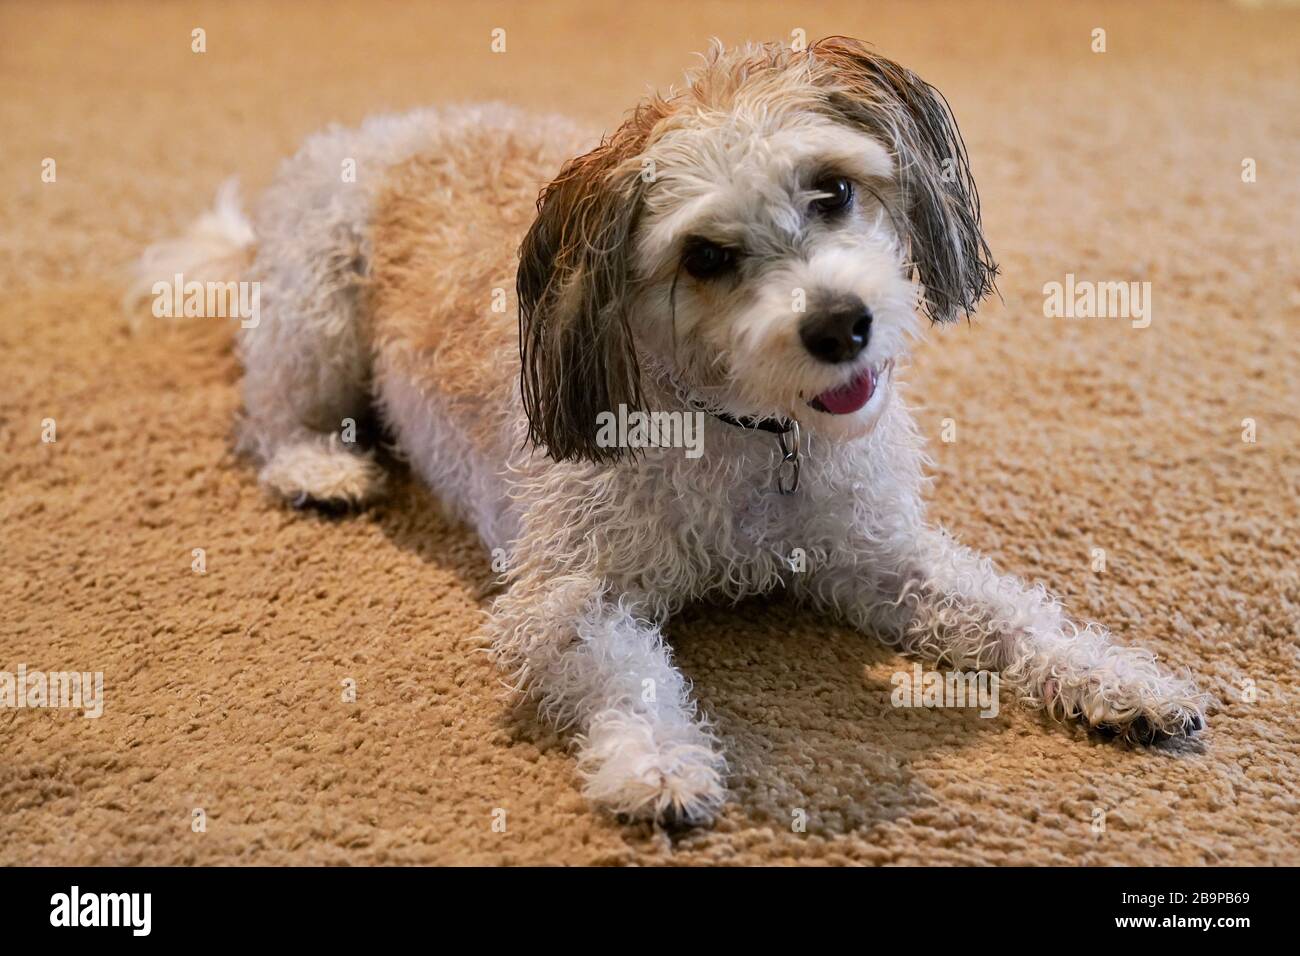 A dog poses for a photo after getting a bath. Stock Photo